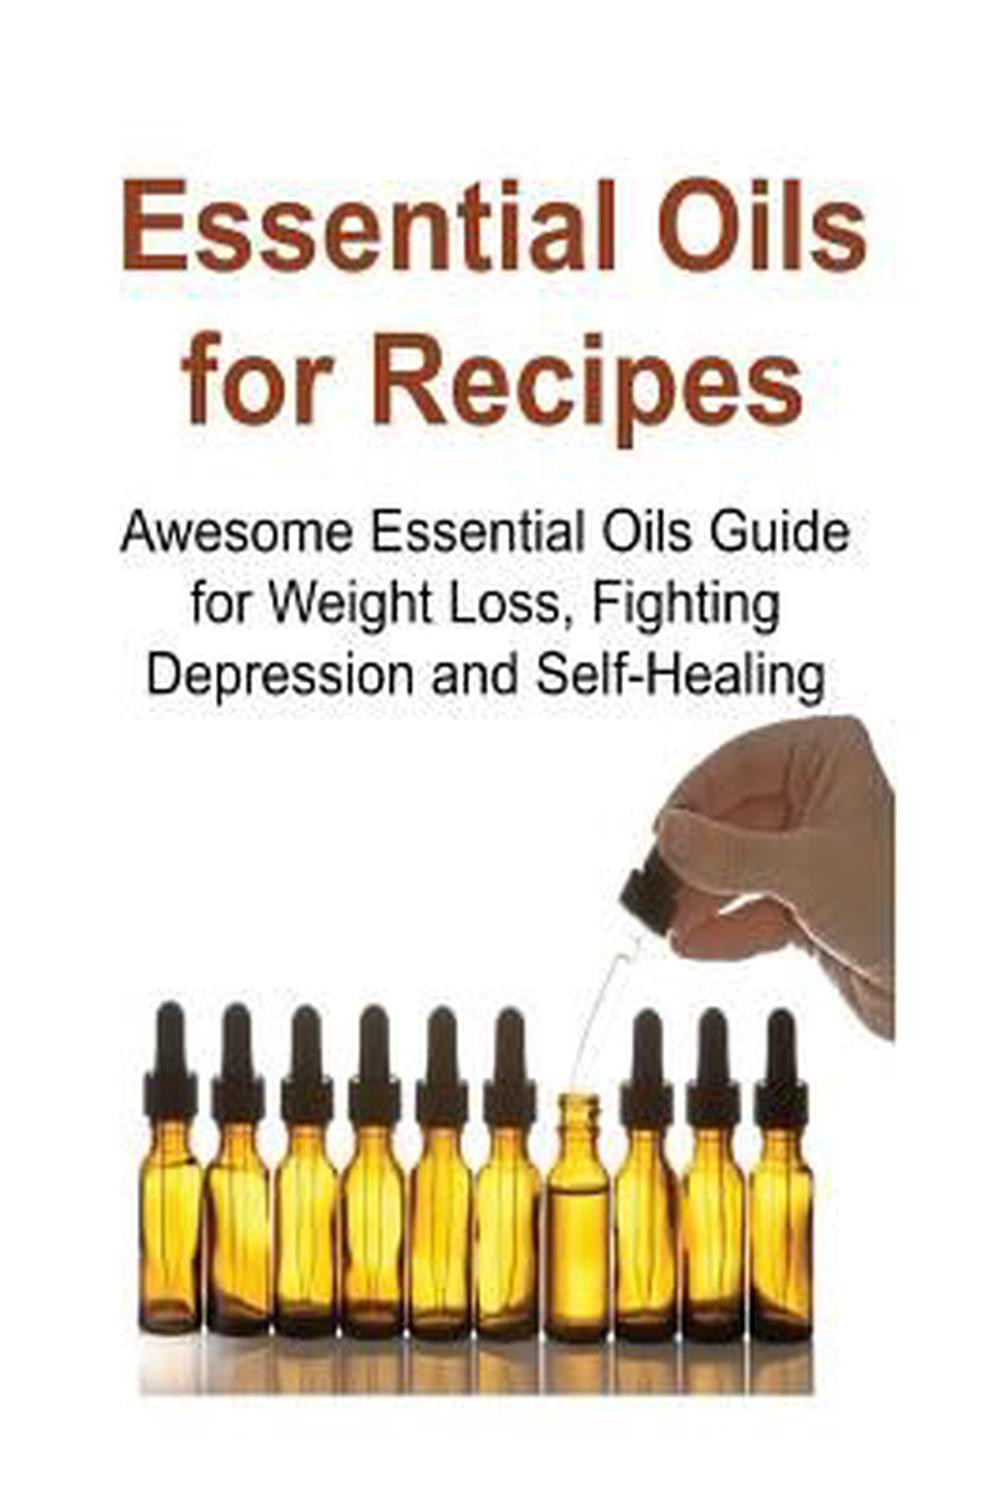 Essential Oils For Weight Loss Recipes
 Essential Oils for Recipes Awesome Essential Oils Guide